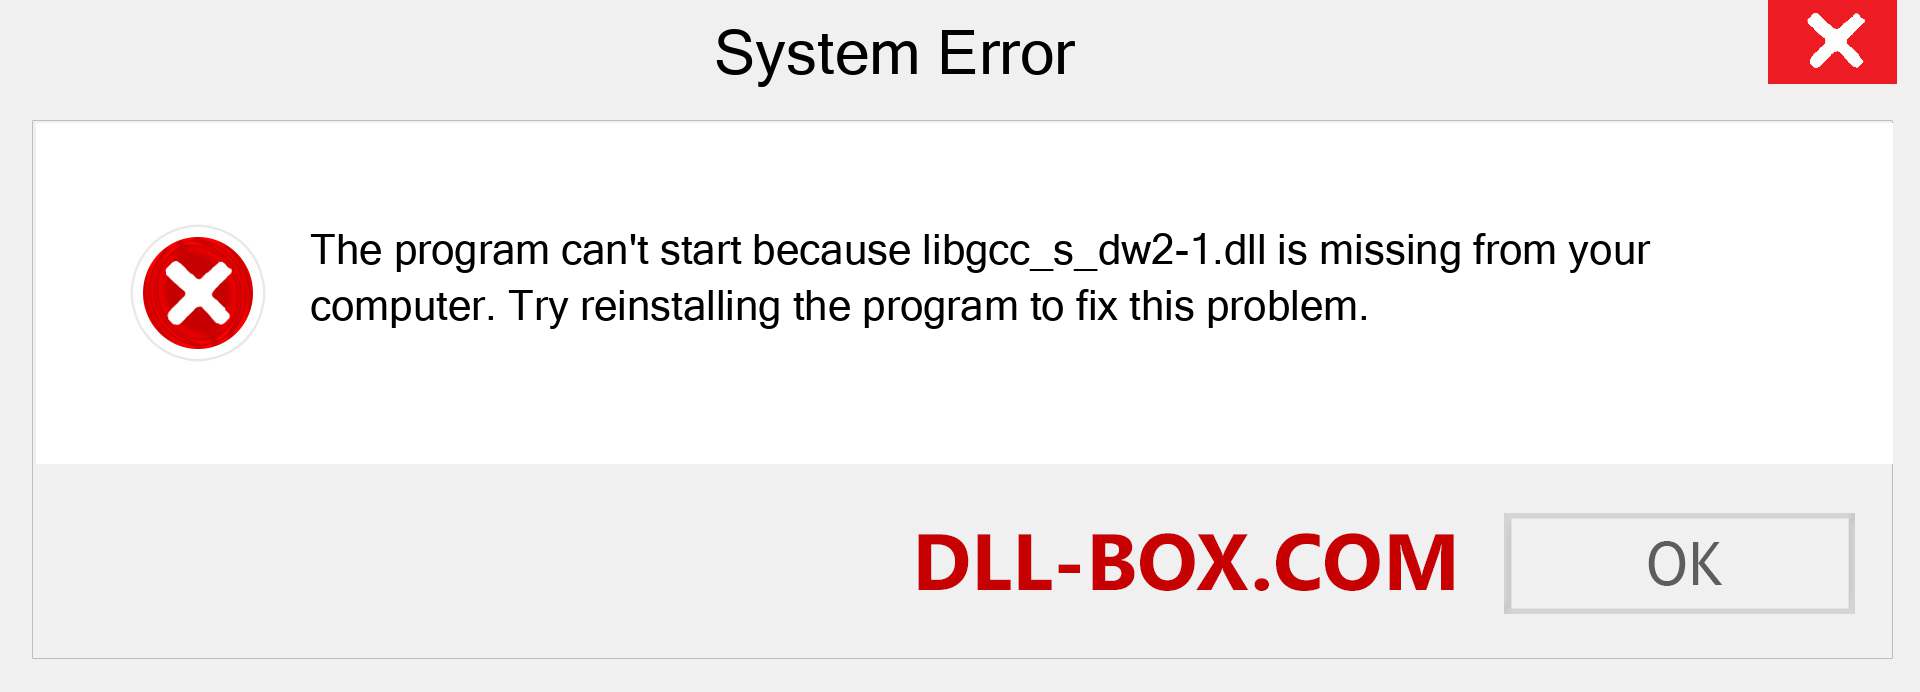  libgcc_s_dw2-1.dll file is missing?. Download for Windows 7, 8, 10 - Fix  libgcc_s_dw2-1 dll Missing Error on Windows, photos, images